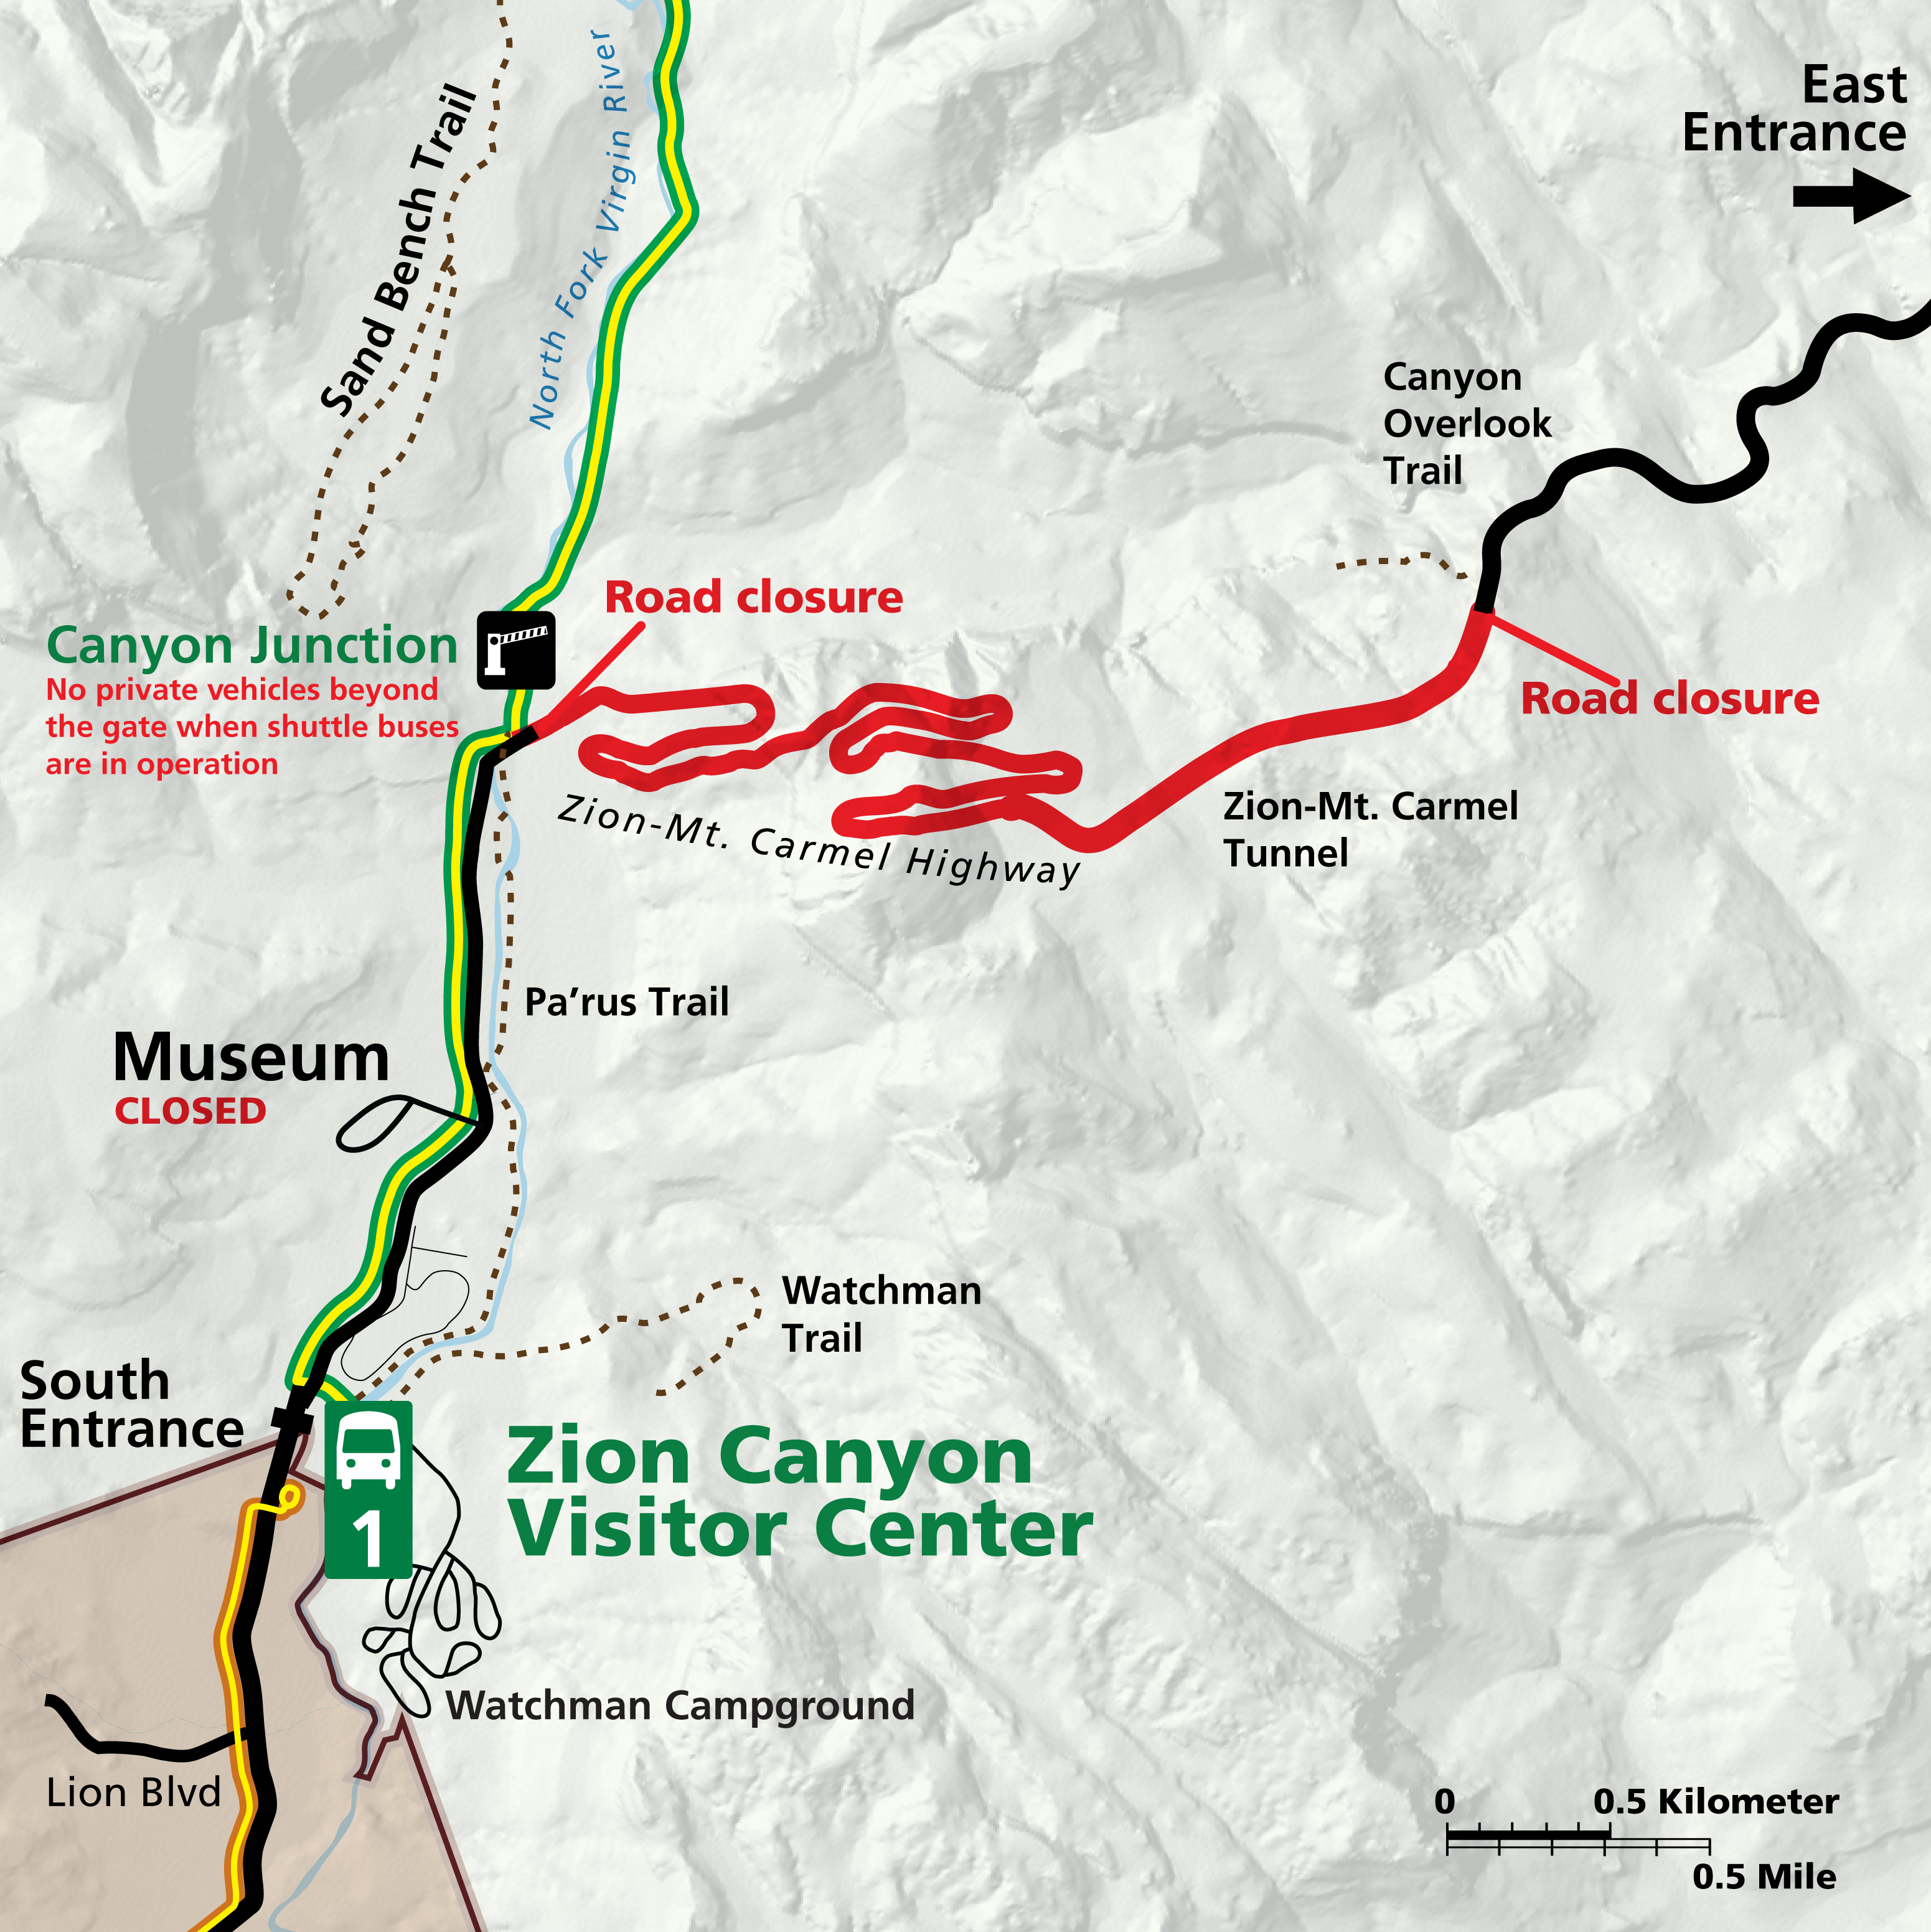 Map of Zion National Park showing road closure between Canyon Junction and the east end of the Zion-Mount Carmel Tunnel on State Route 9.